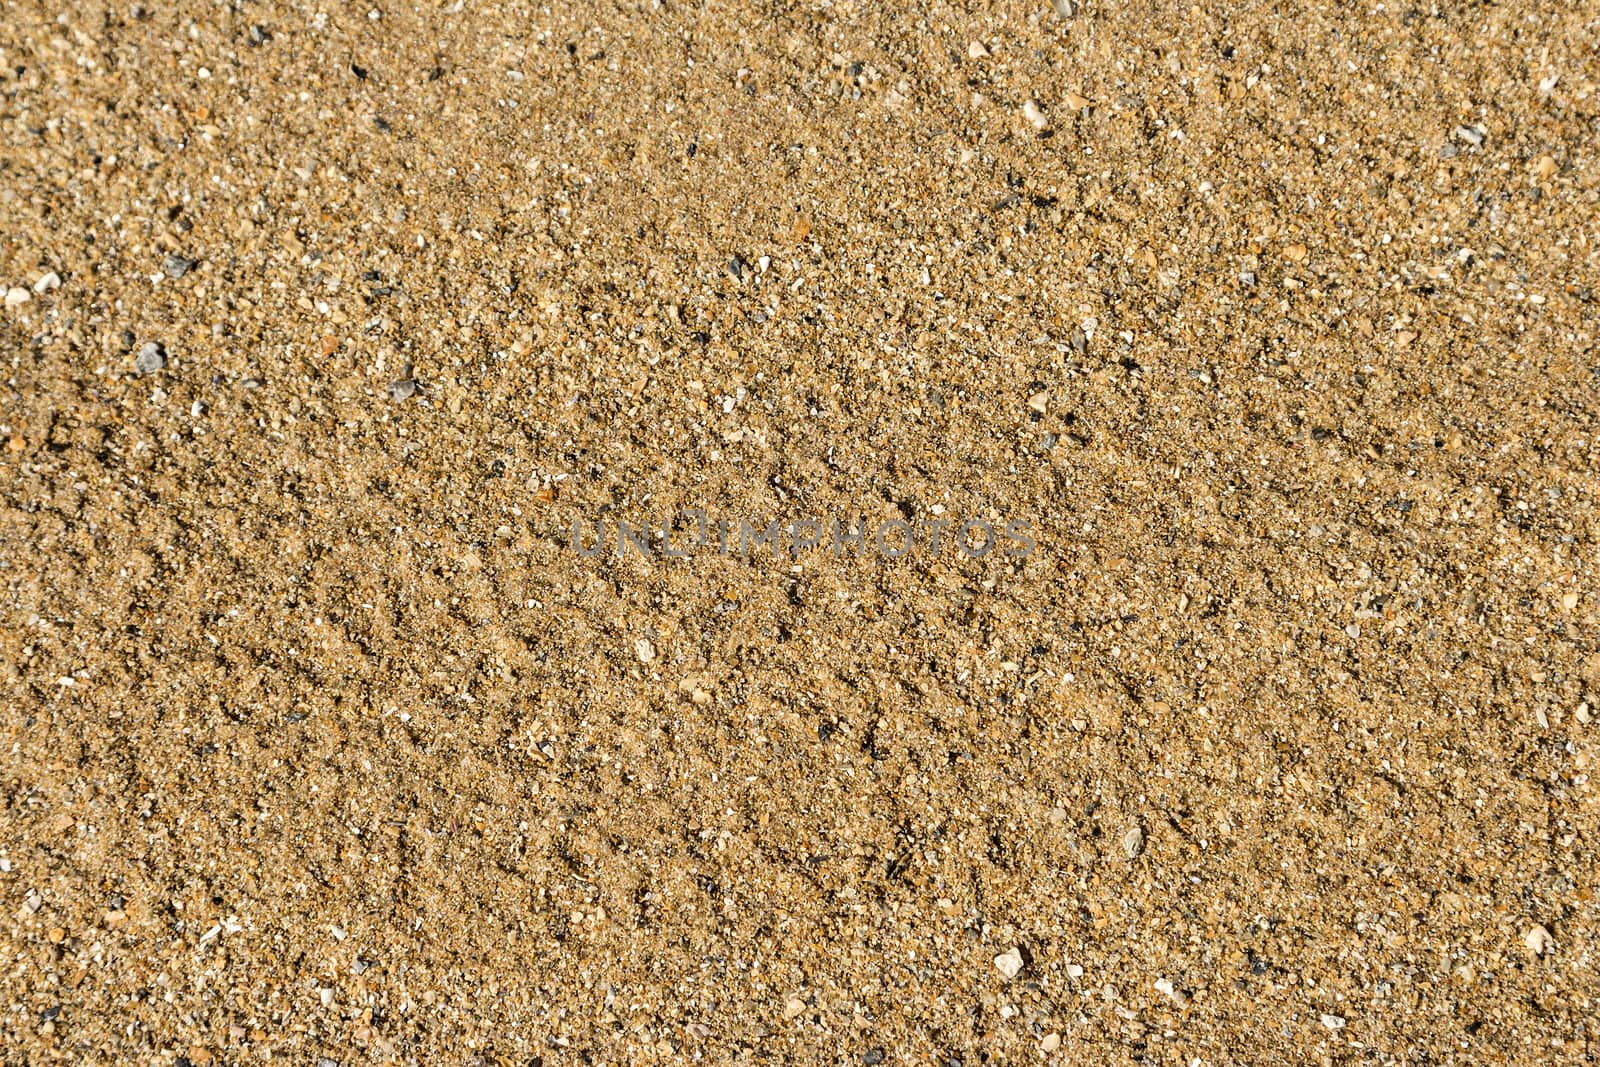 A brown stone based textured background